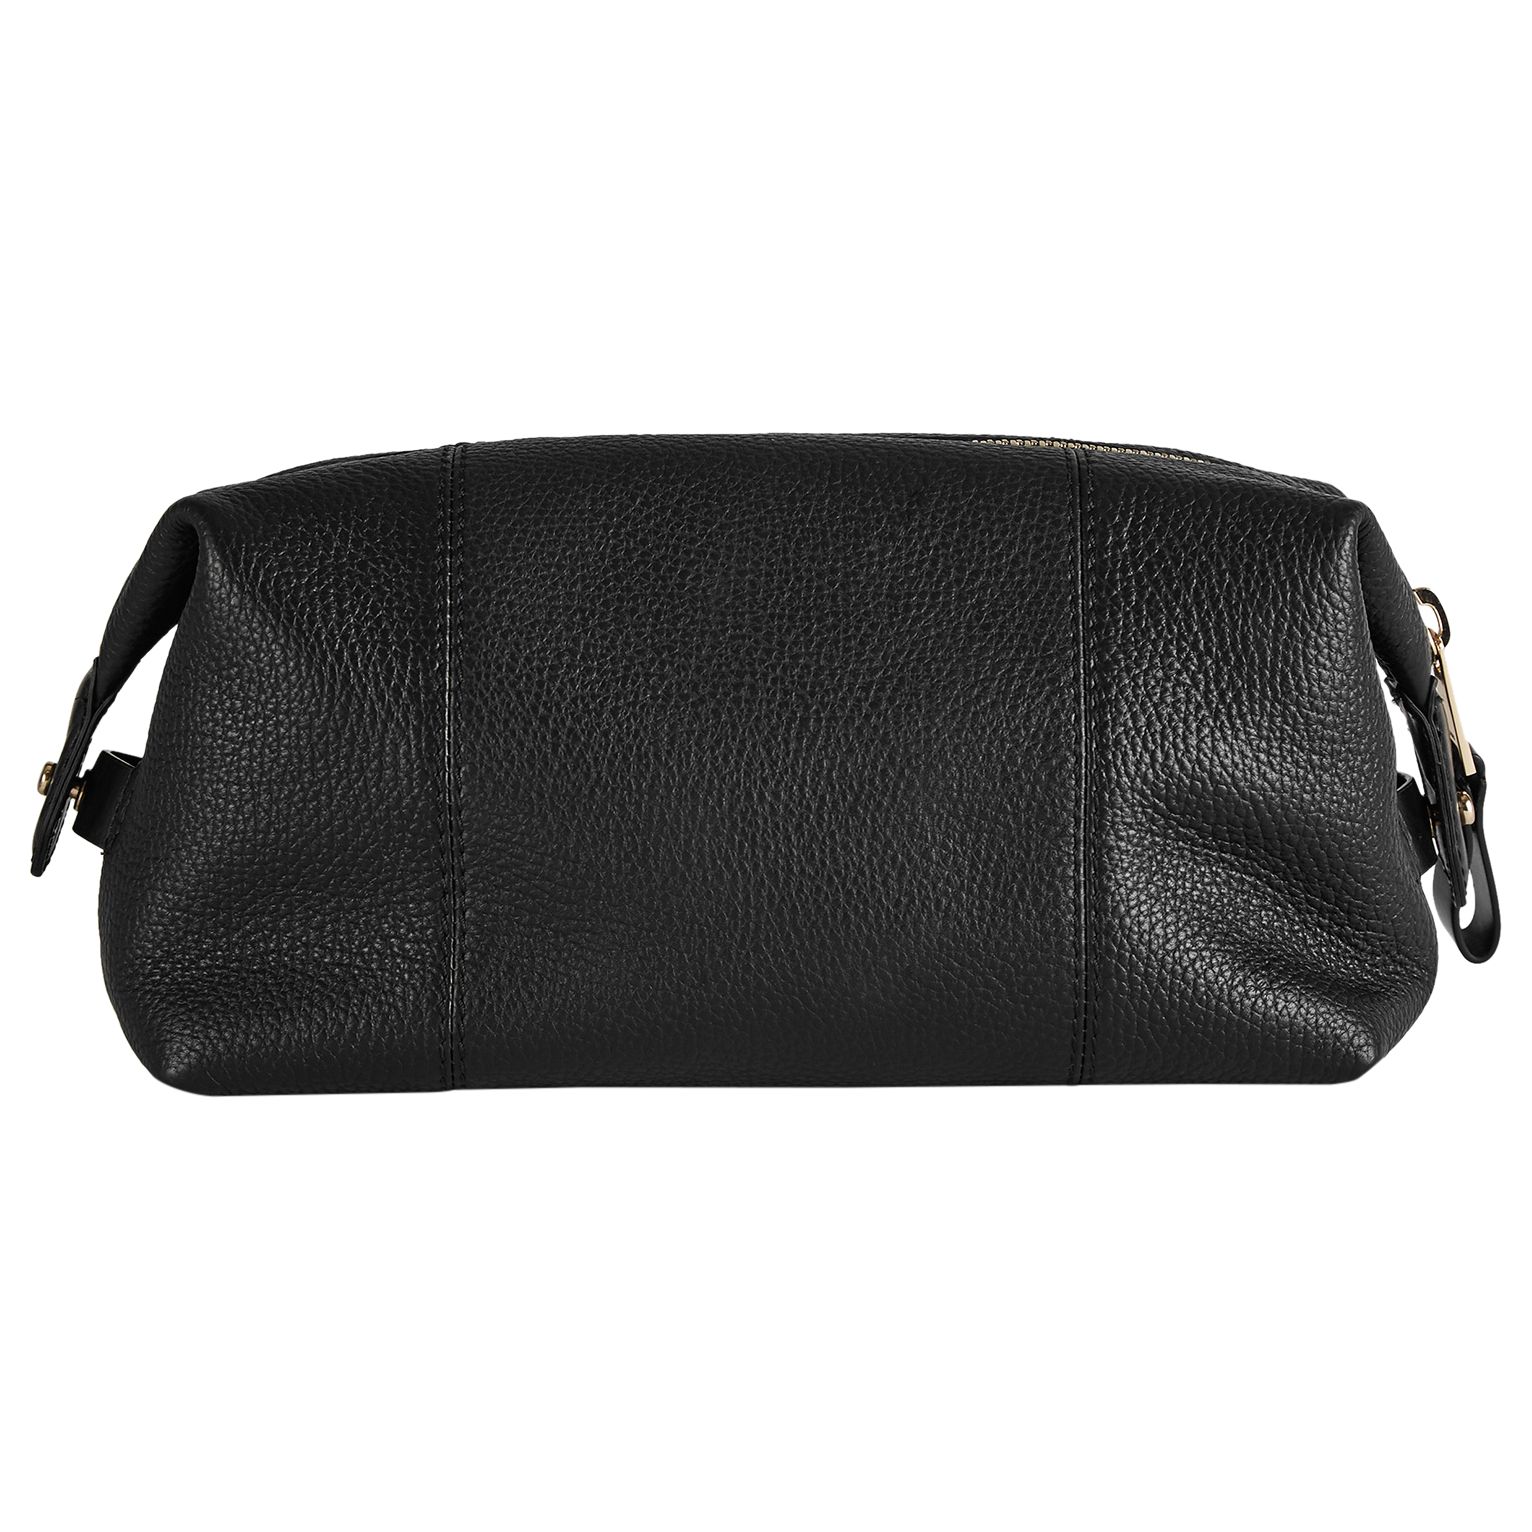 Men's Toiletry & Wash Bags | Leather Wash Bags | John Lewis